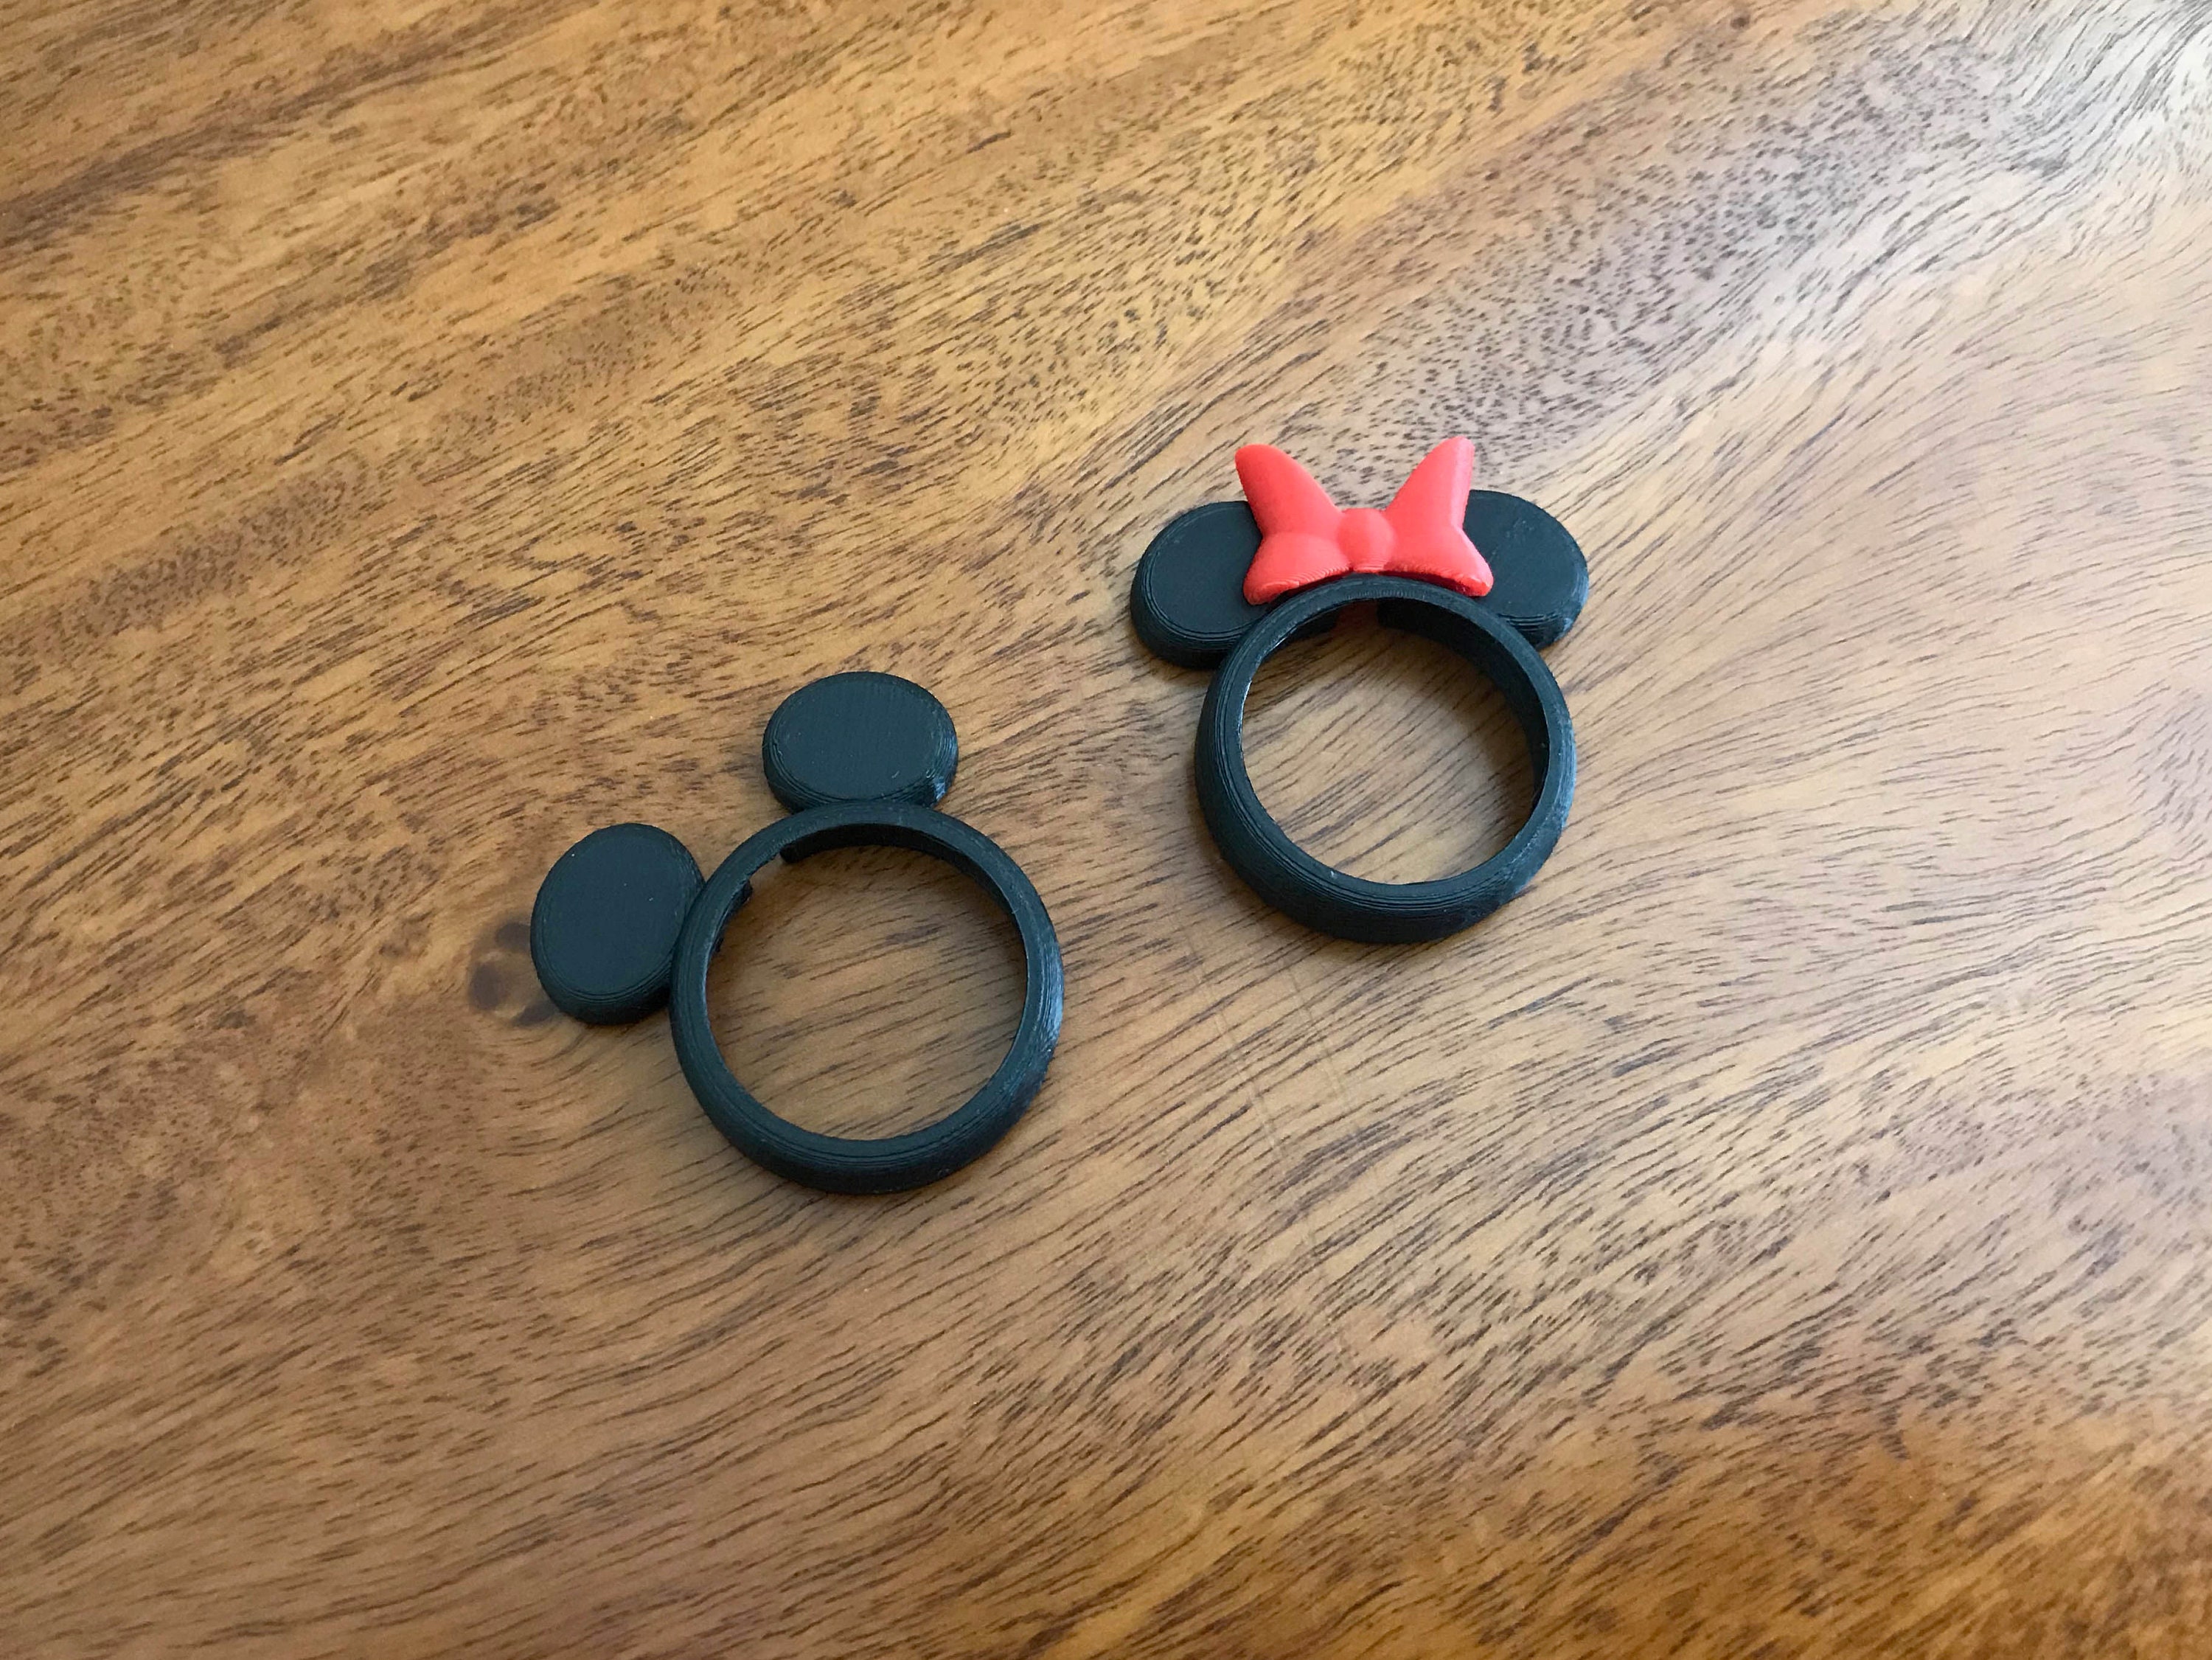 Flat Apple Watch Charger Cover Mickey Mouse Inspired 3D pic